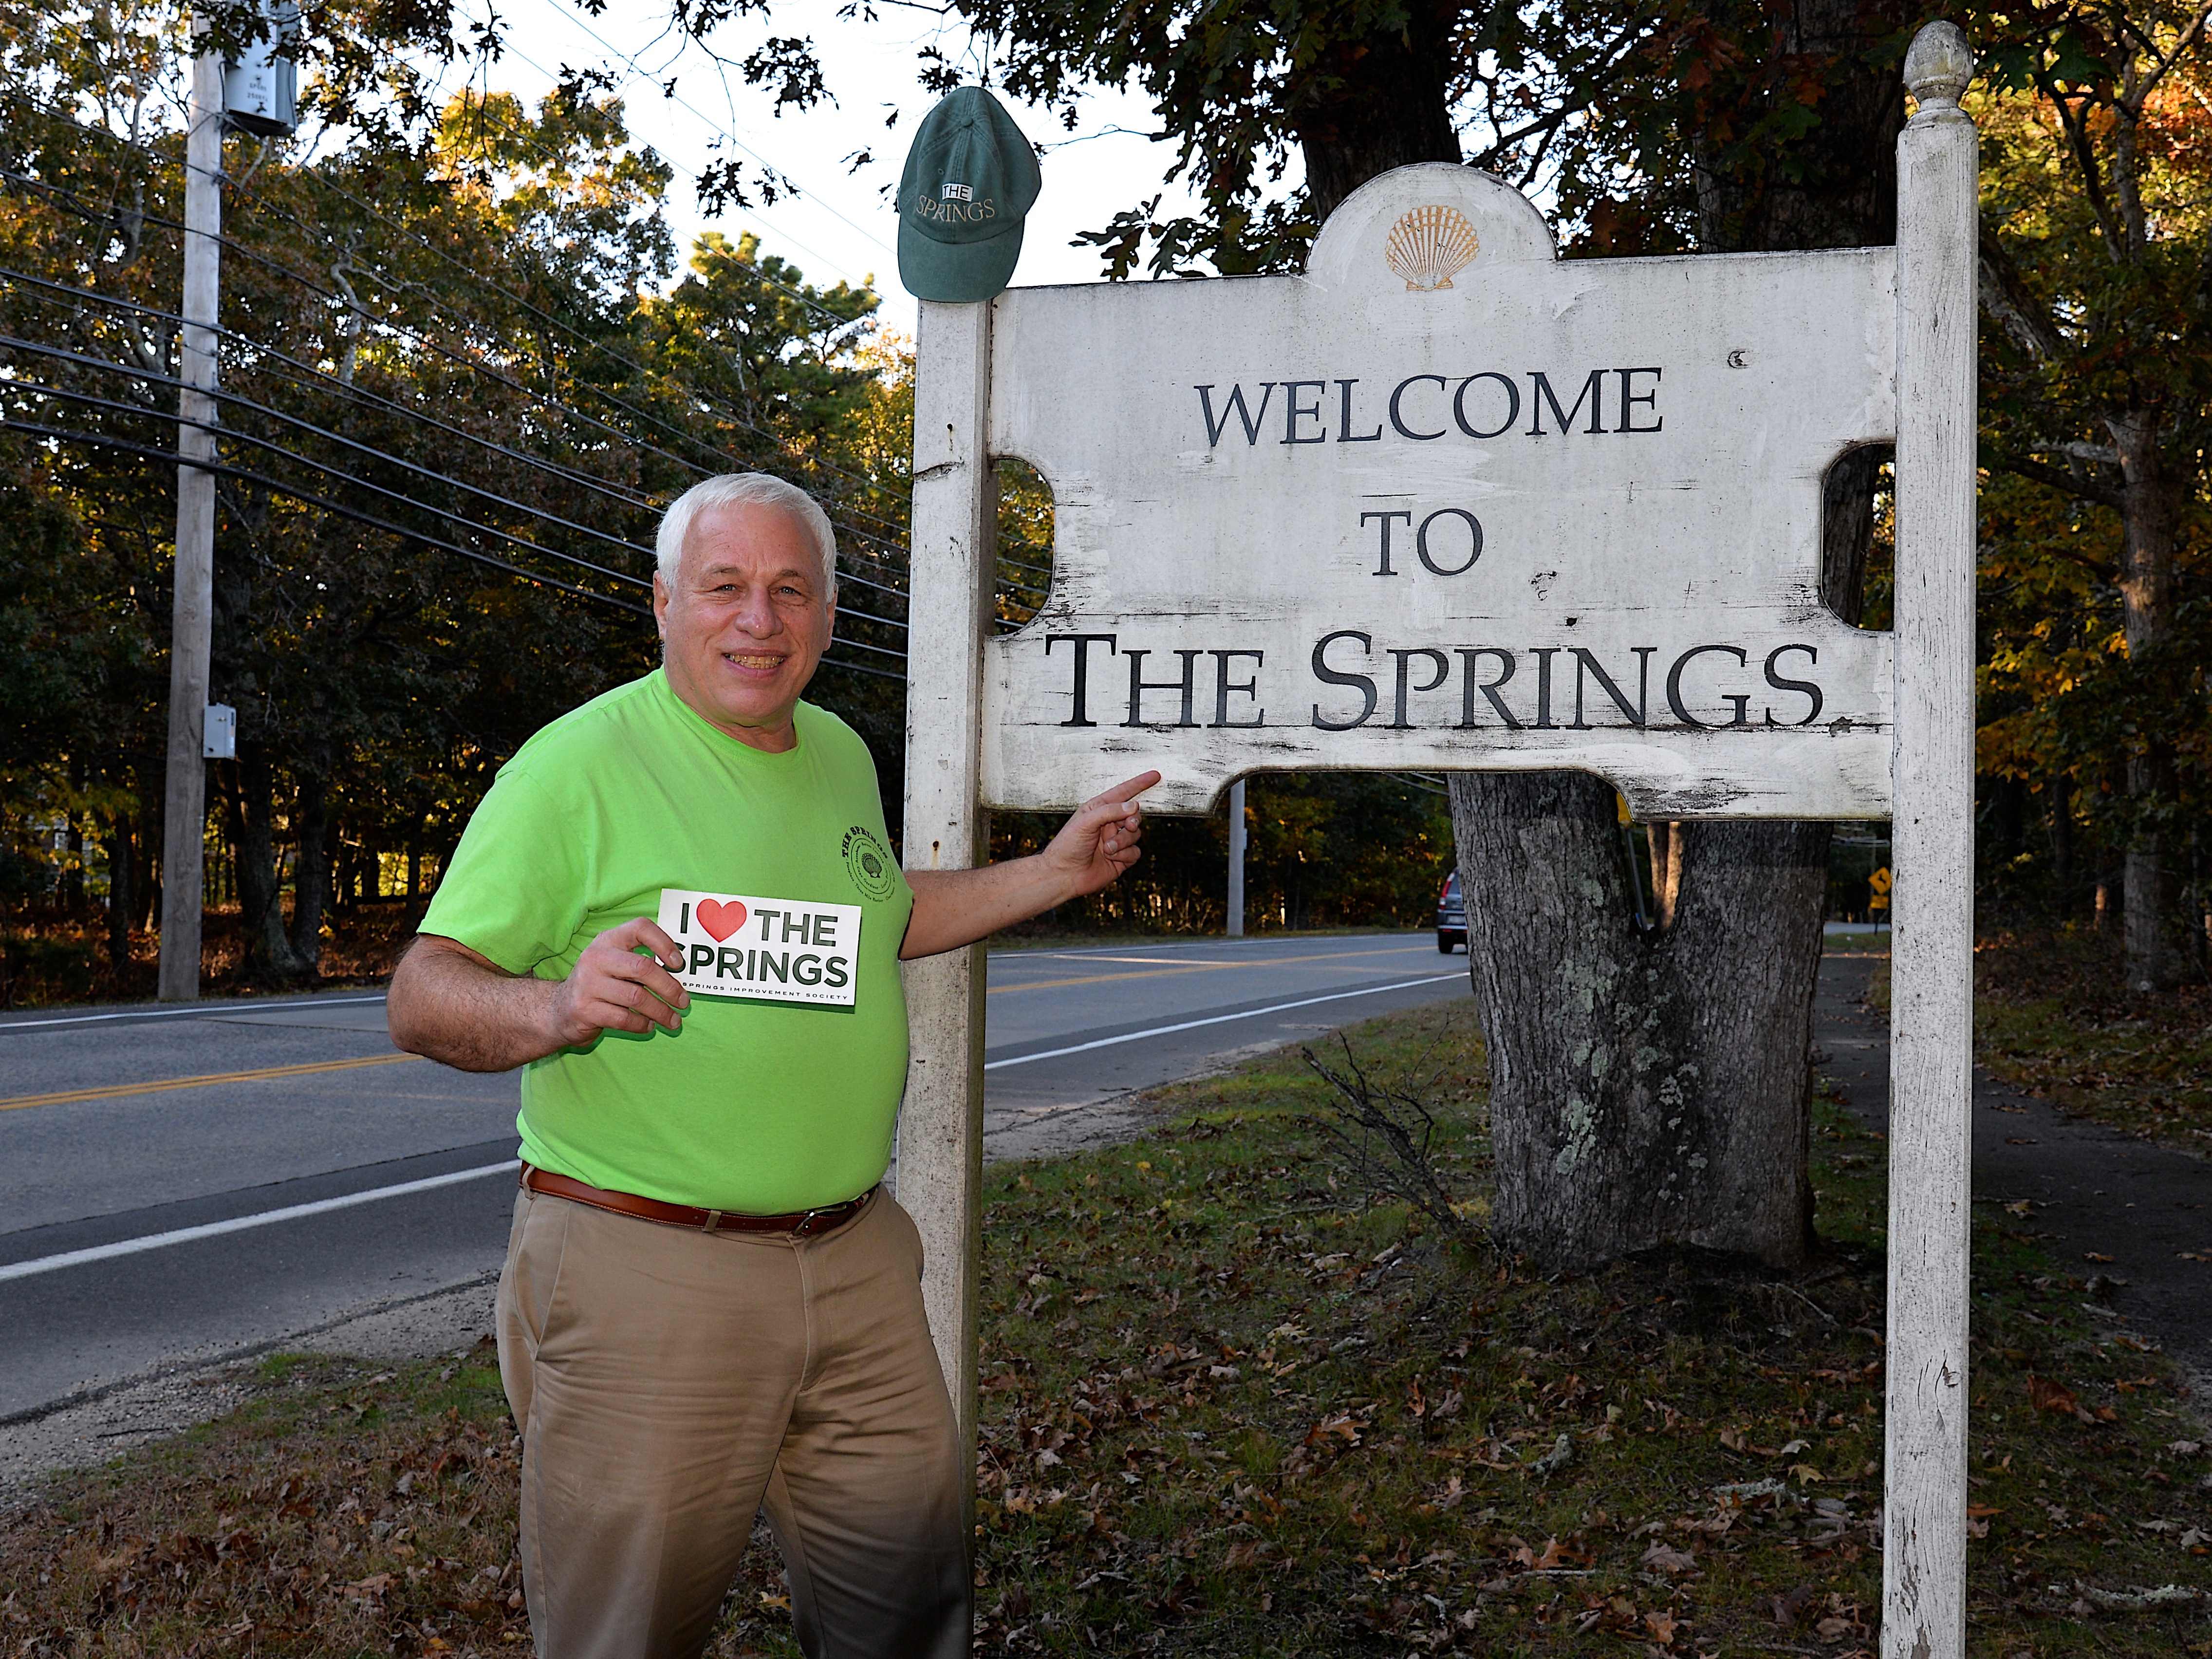 David Buda resigned from the Springs Citizens Advisory Committee this week after the Town Board ignored a unanimous vote by the committee to leave 